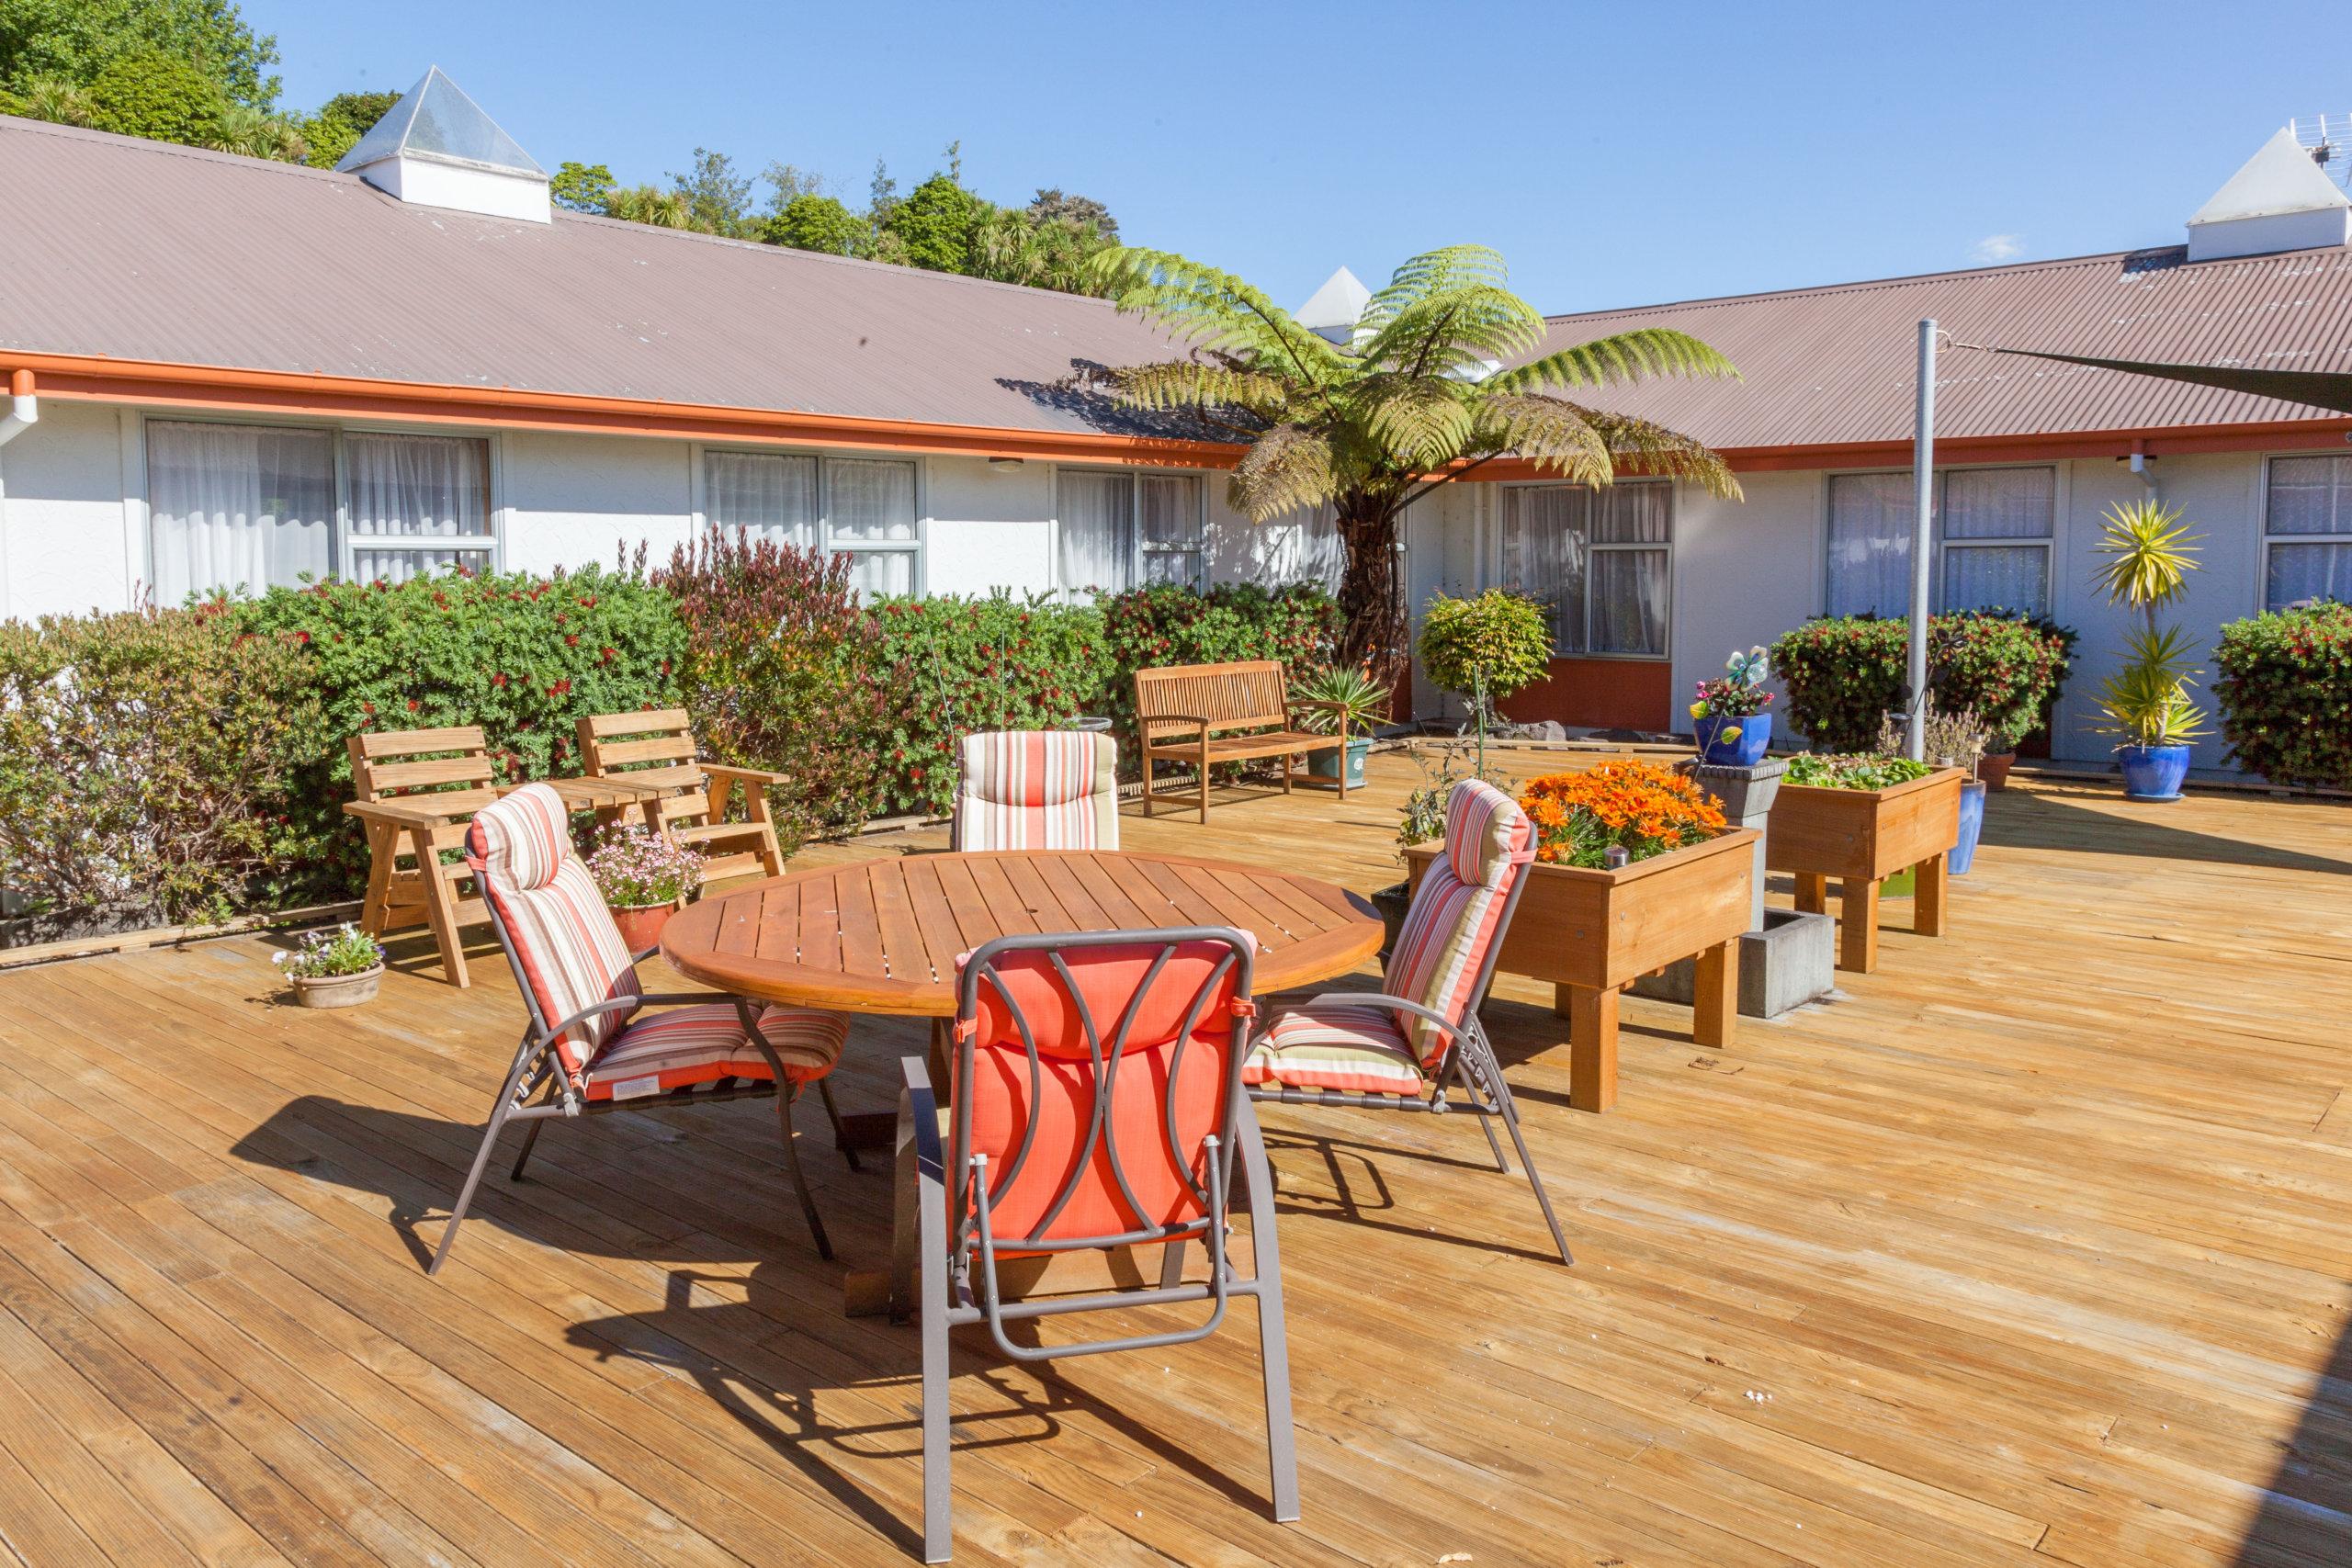 Ohinemuri retirement village and rest home decking area with palm tree